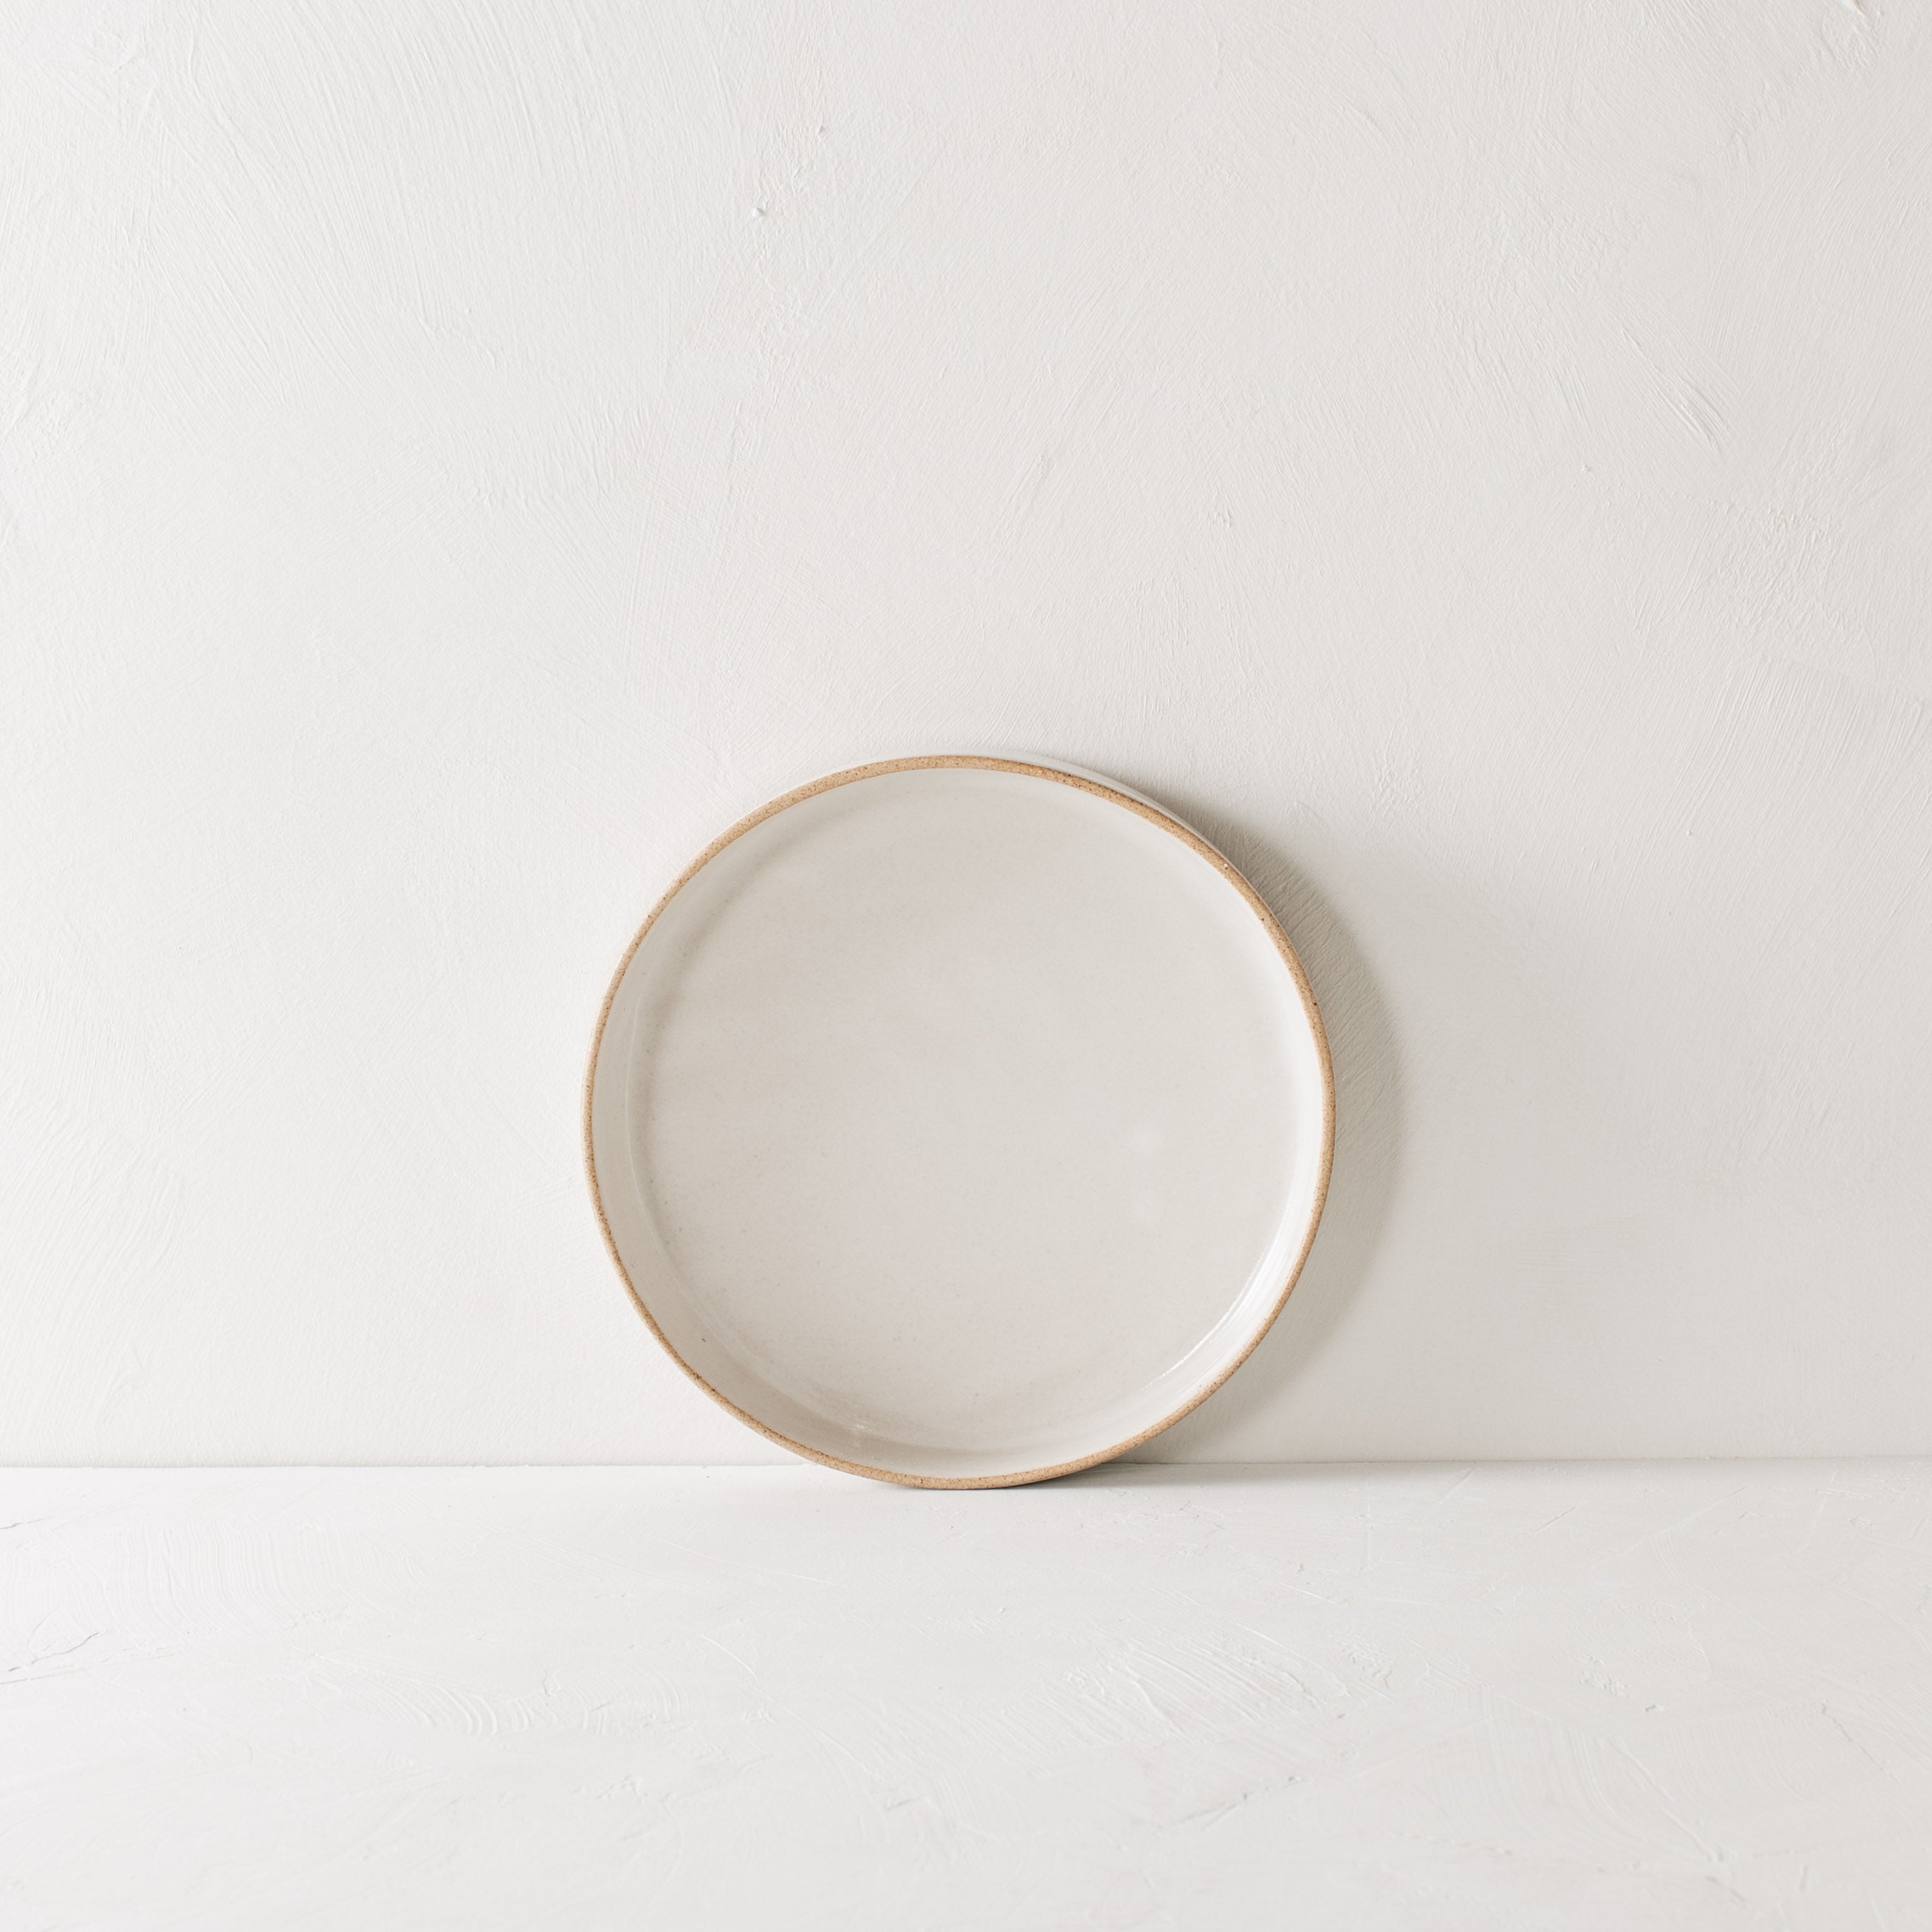 Minimal white dinner dish leaning against the backdrop. Exposed stoneware rim can be seen. Handmade ceramic dinner dish, designed and sold by Convivial Production, Kansas City ceramics.